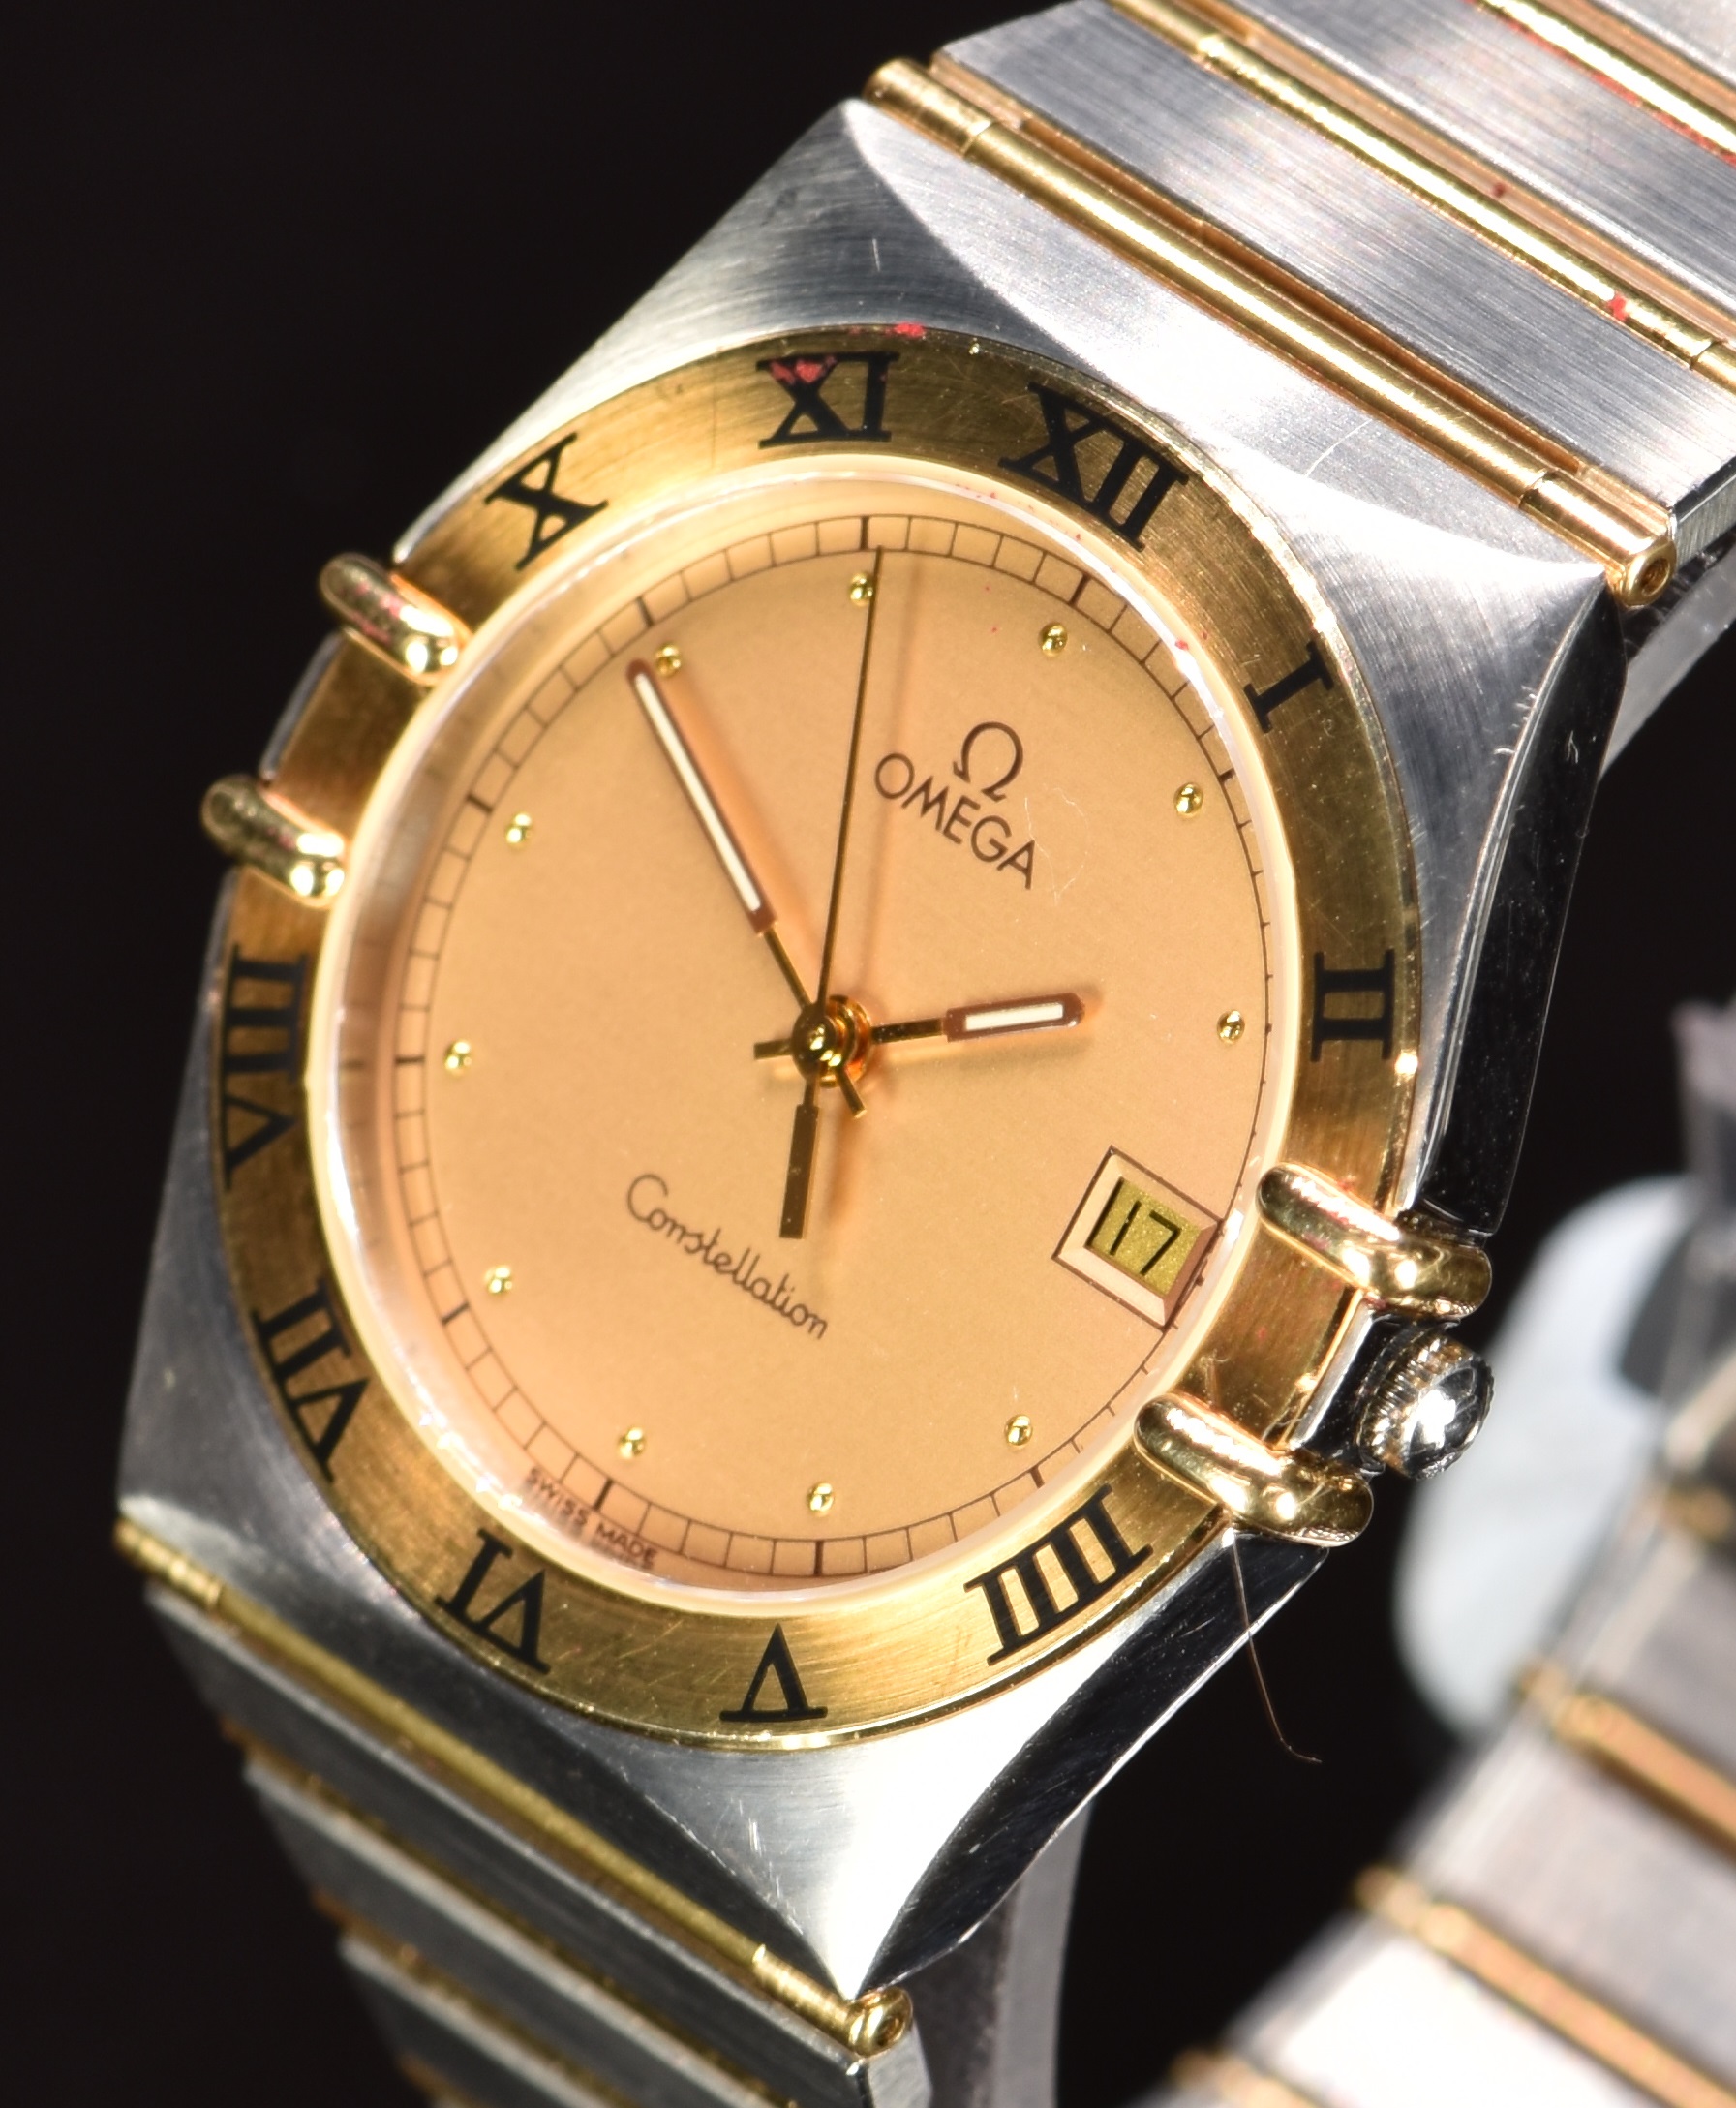 Omega Constellation gentleman's wristwatch with date aperture, luminous hands, gold dial, back Roman - Image 2 of 7